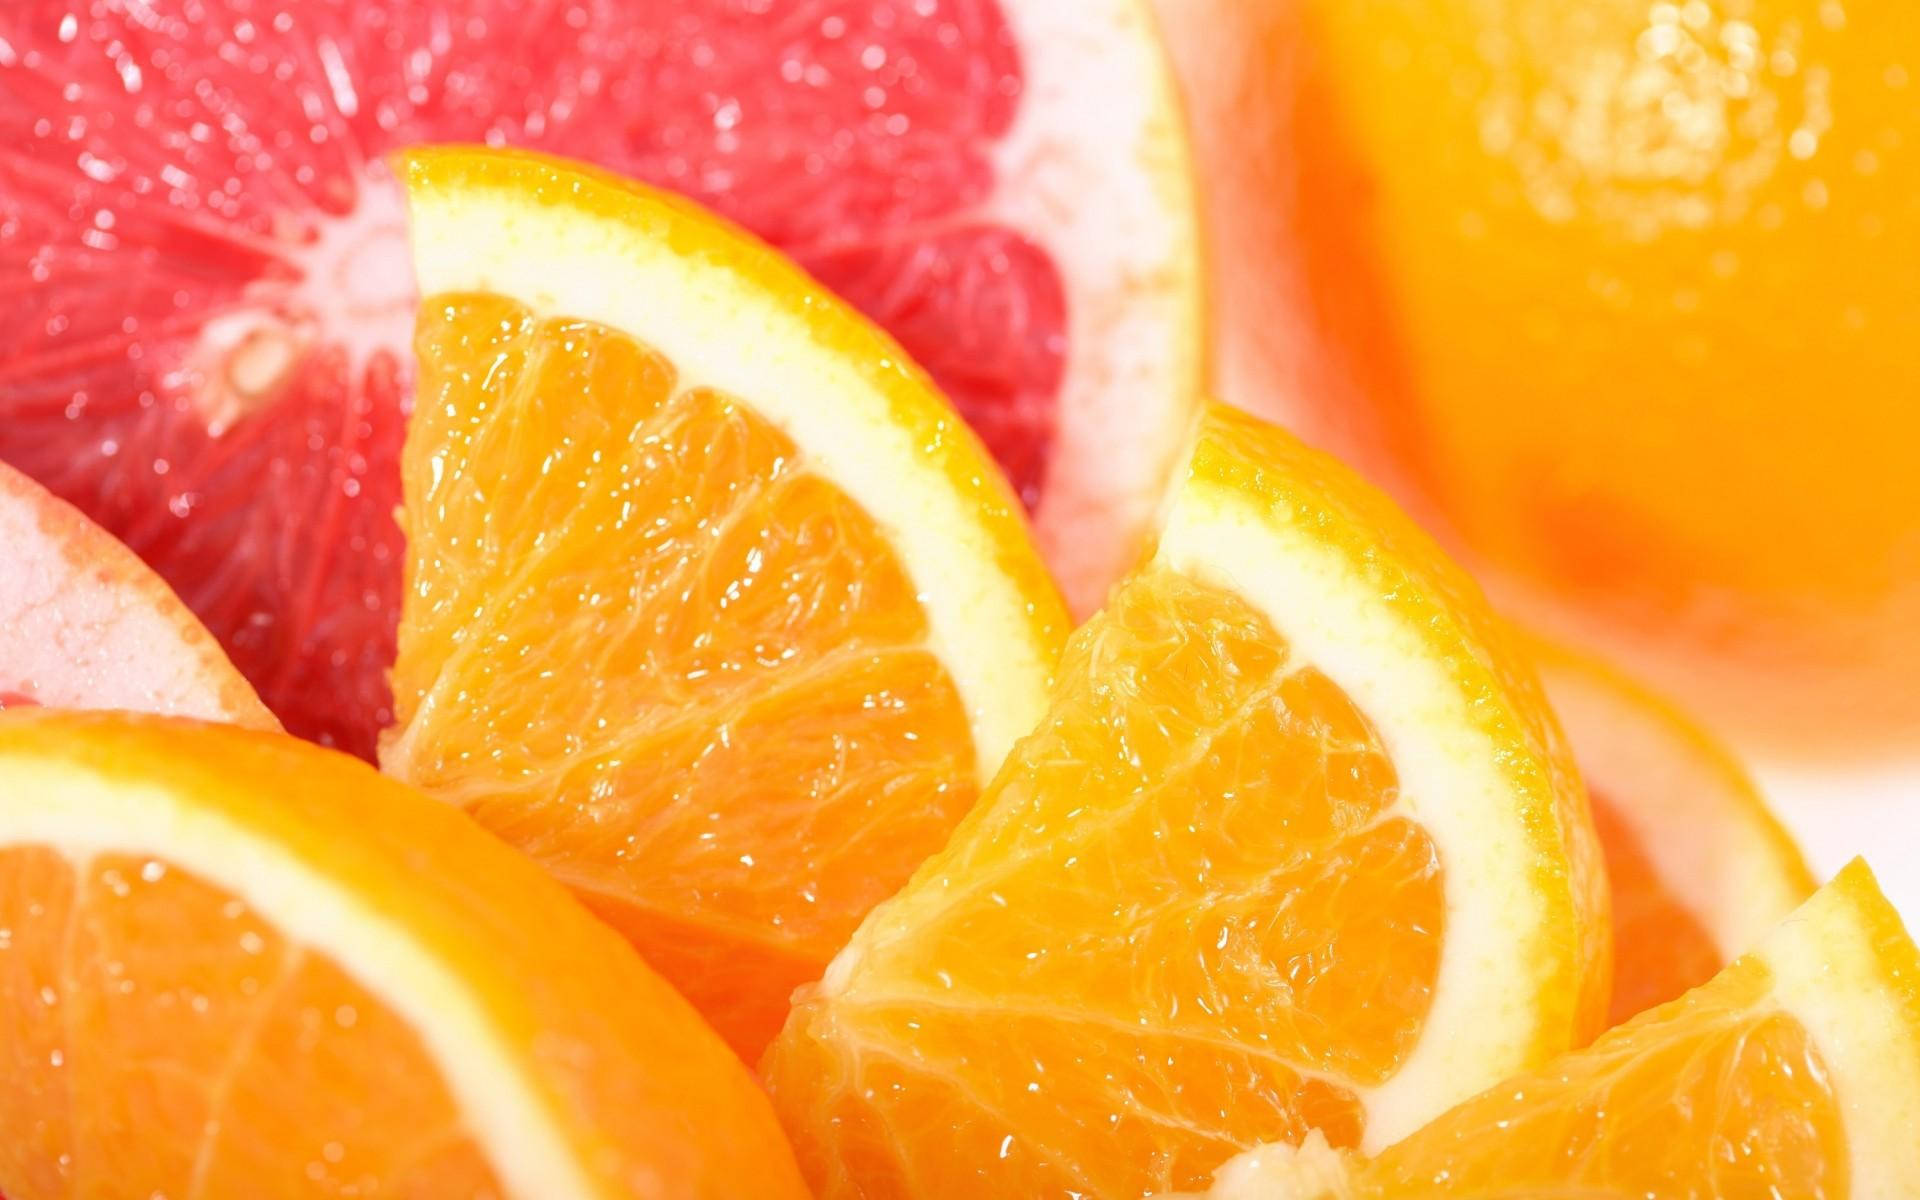 Bright and Fresh Sliced Citrus Fruits - Grapefruits and Oranges Wallpaper